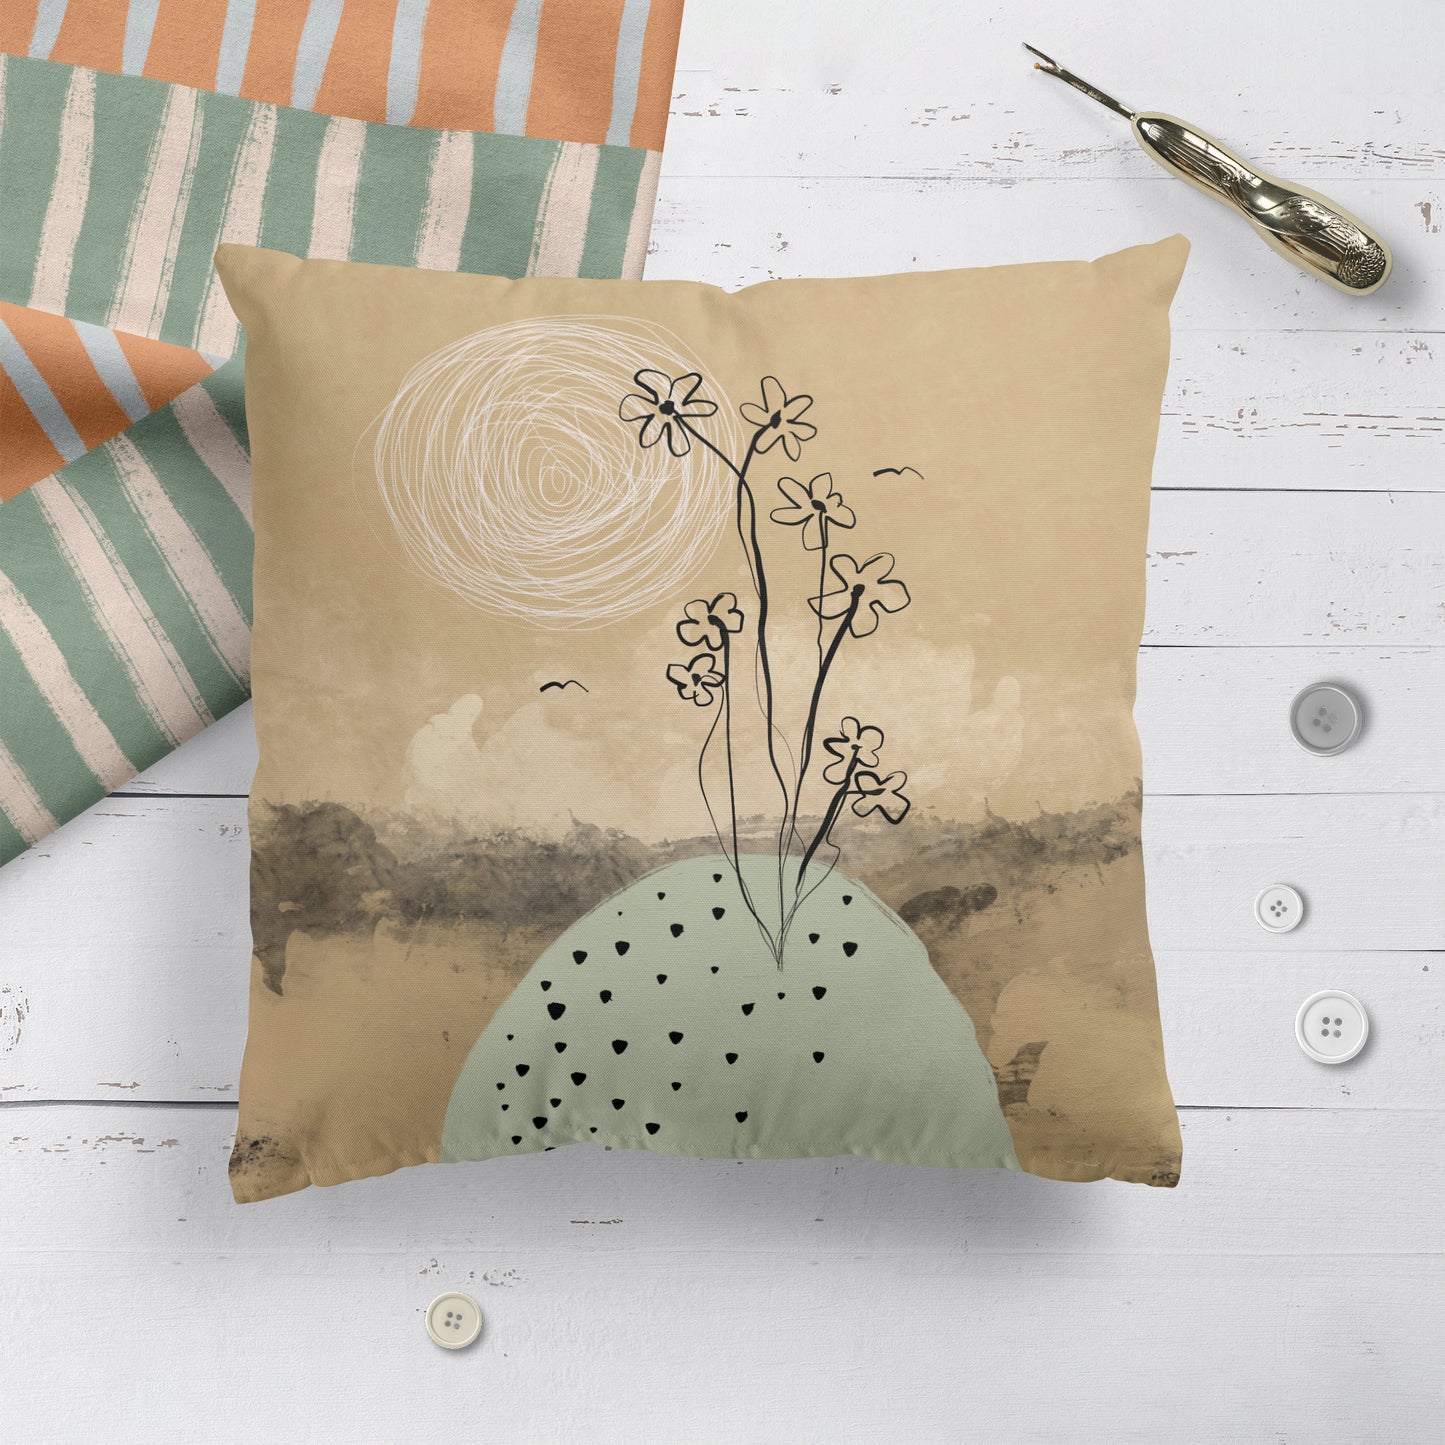 Throw Pillow with Hand painted Illustration